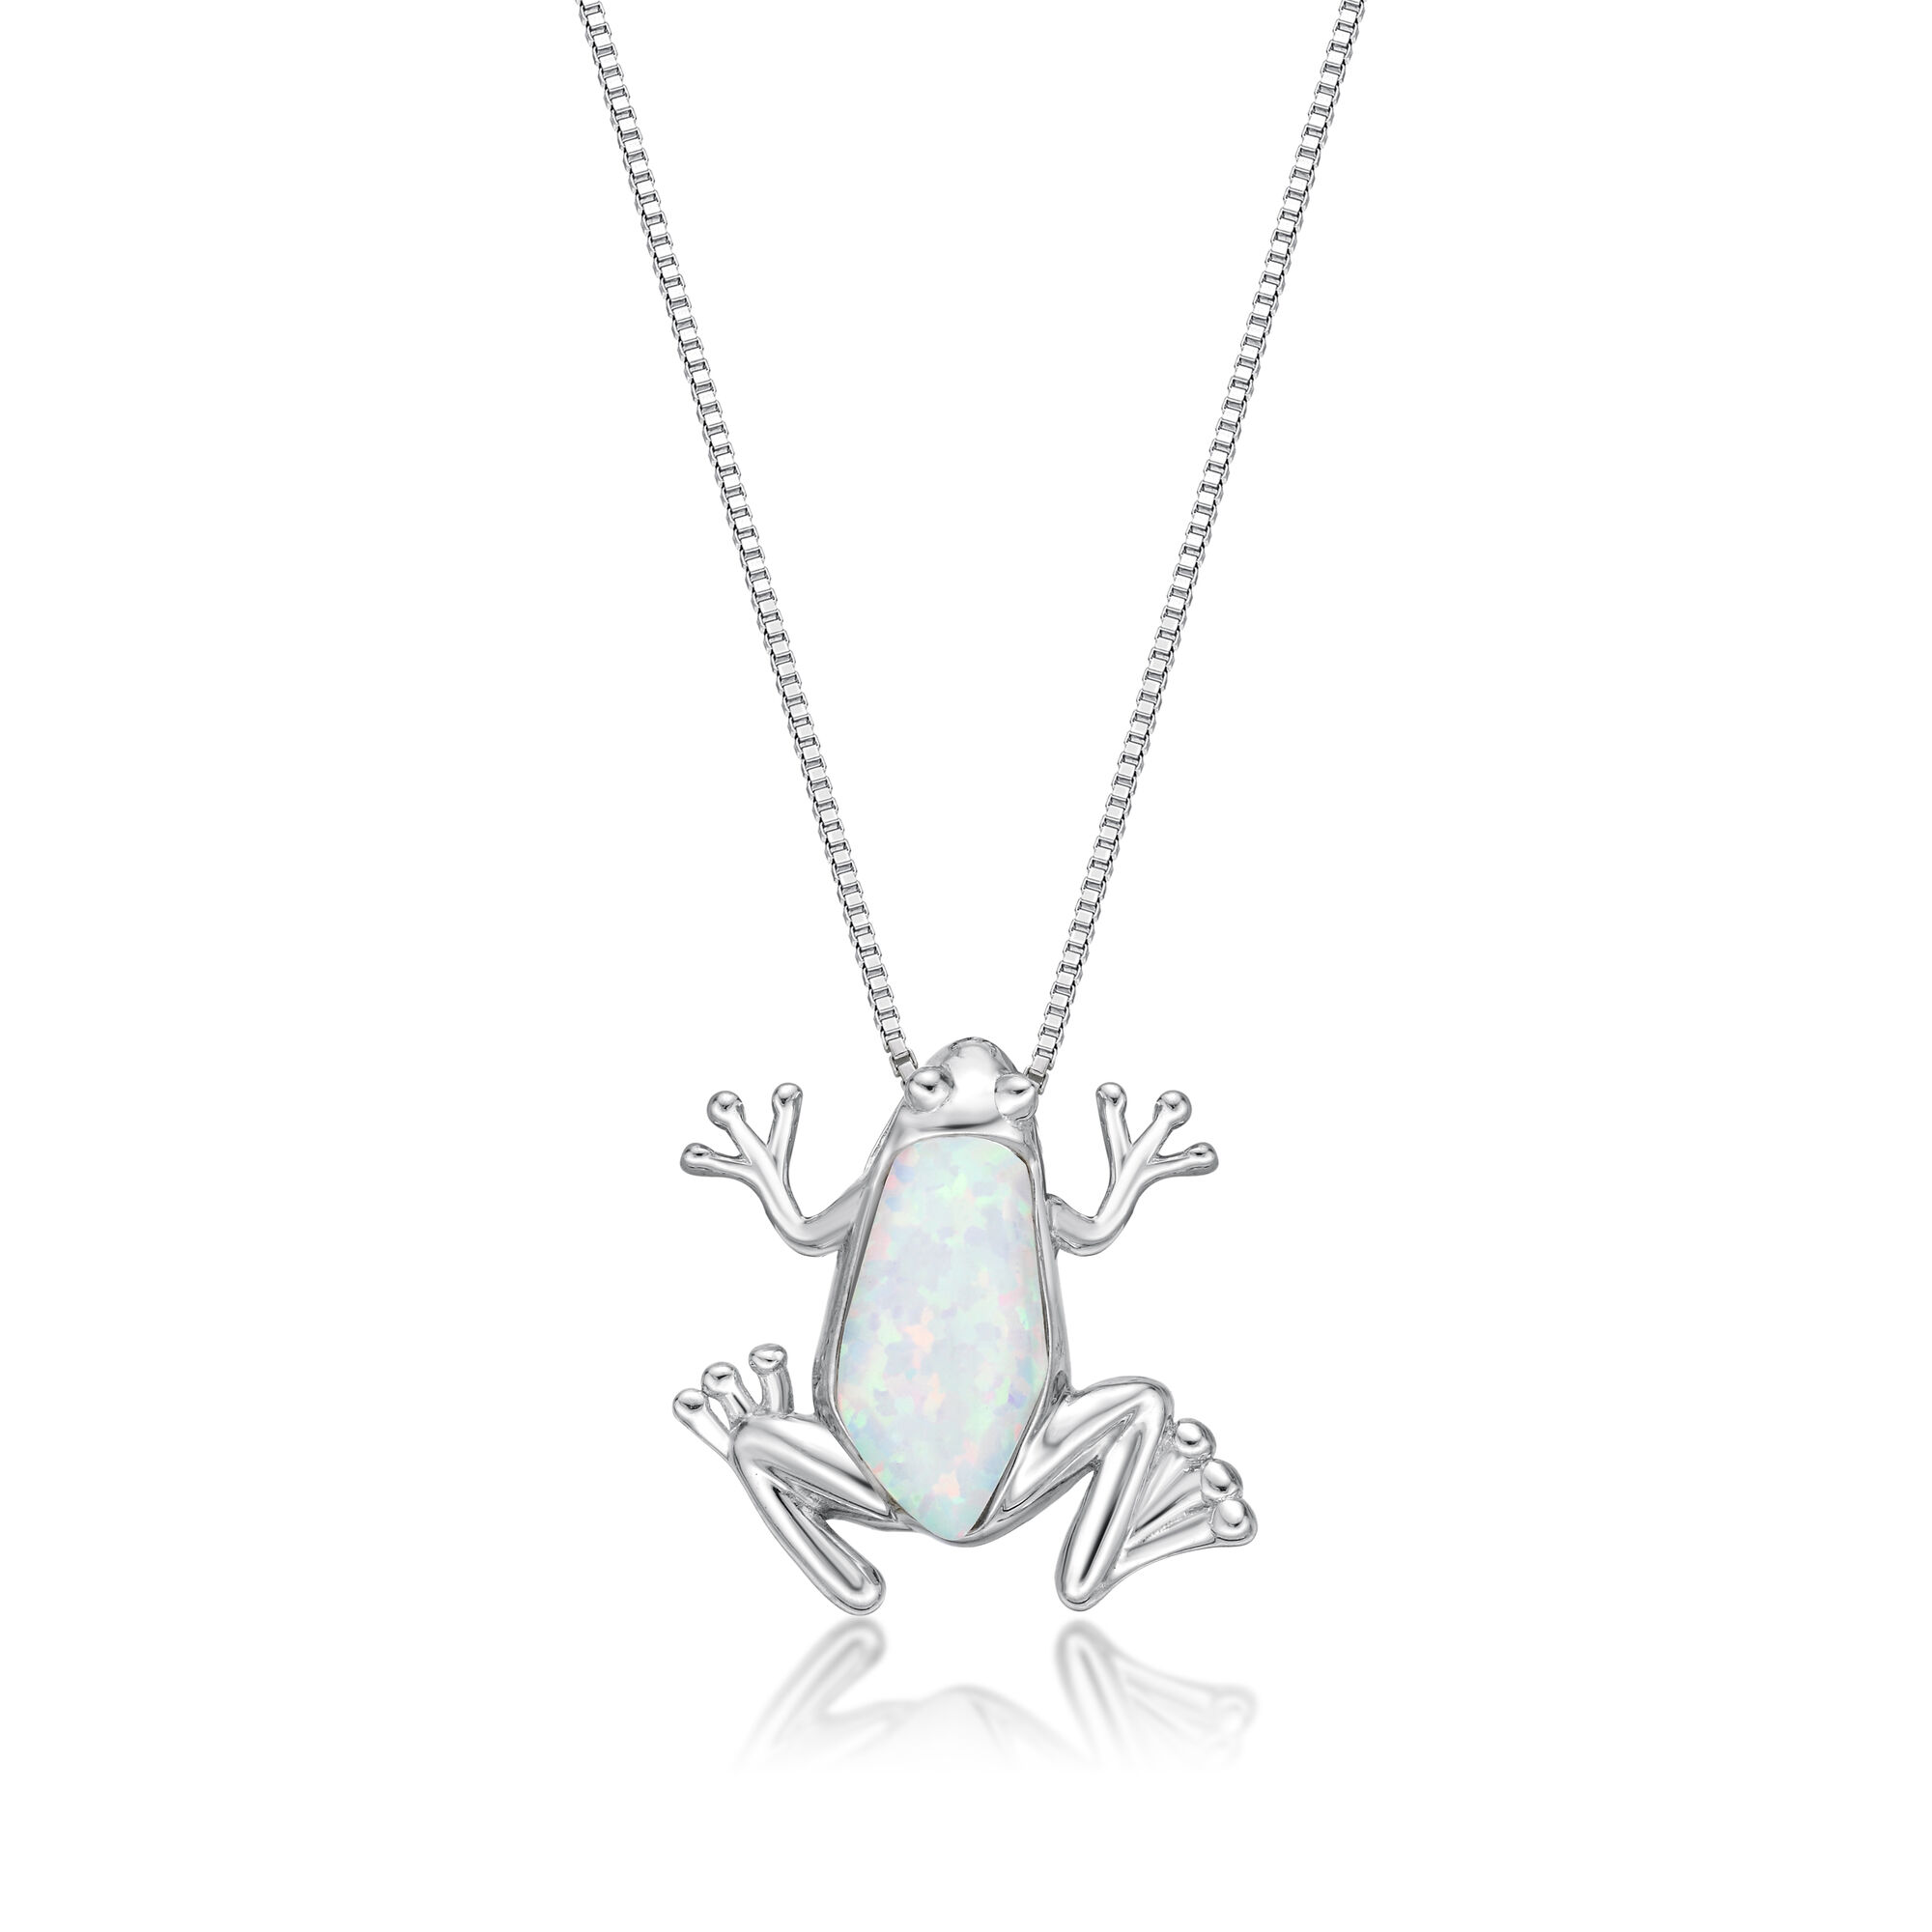 Lavari Jewelers Women's Created White Opal Frog Diamond Pendant with Lobster Clasp, Sterling Silver, .015 Cttw, 18 Inch Cable Chain